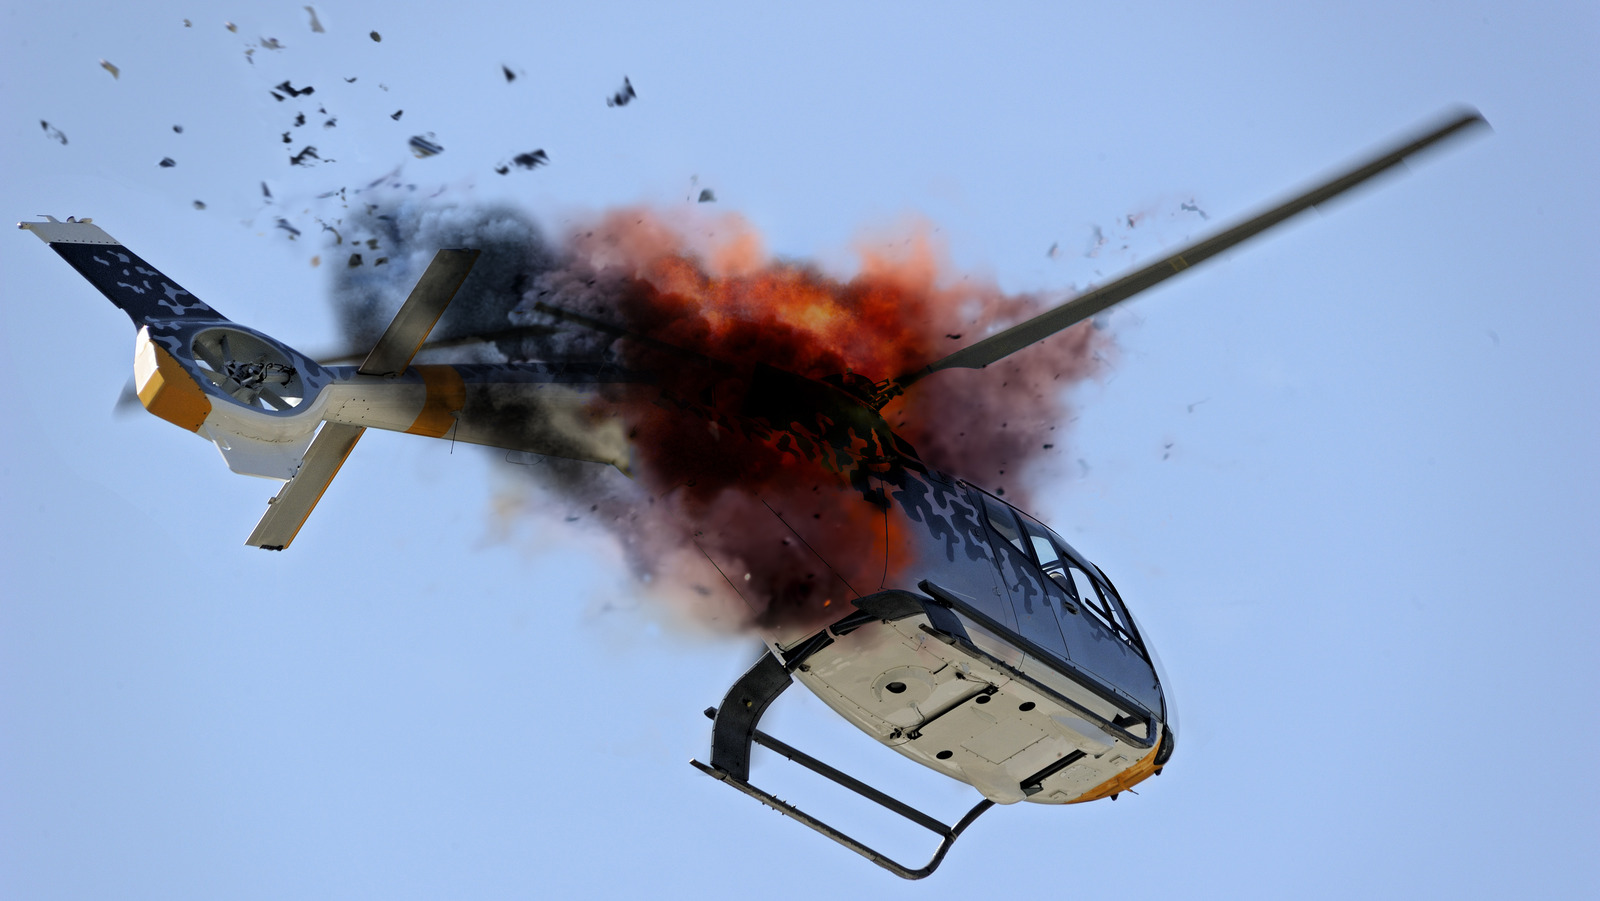 The Big Myth About Helicopter Crashes You Shouldn’t Believe – SlashGear